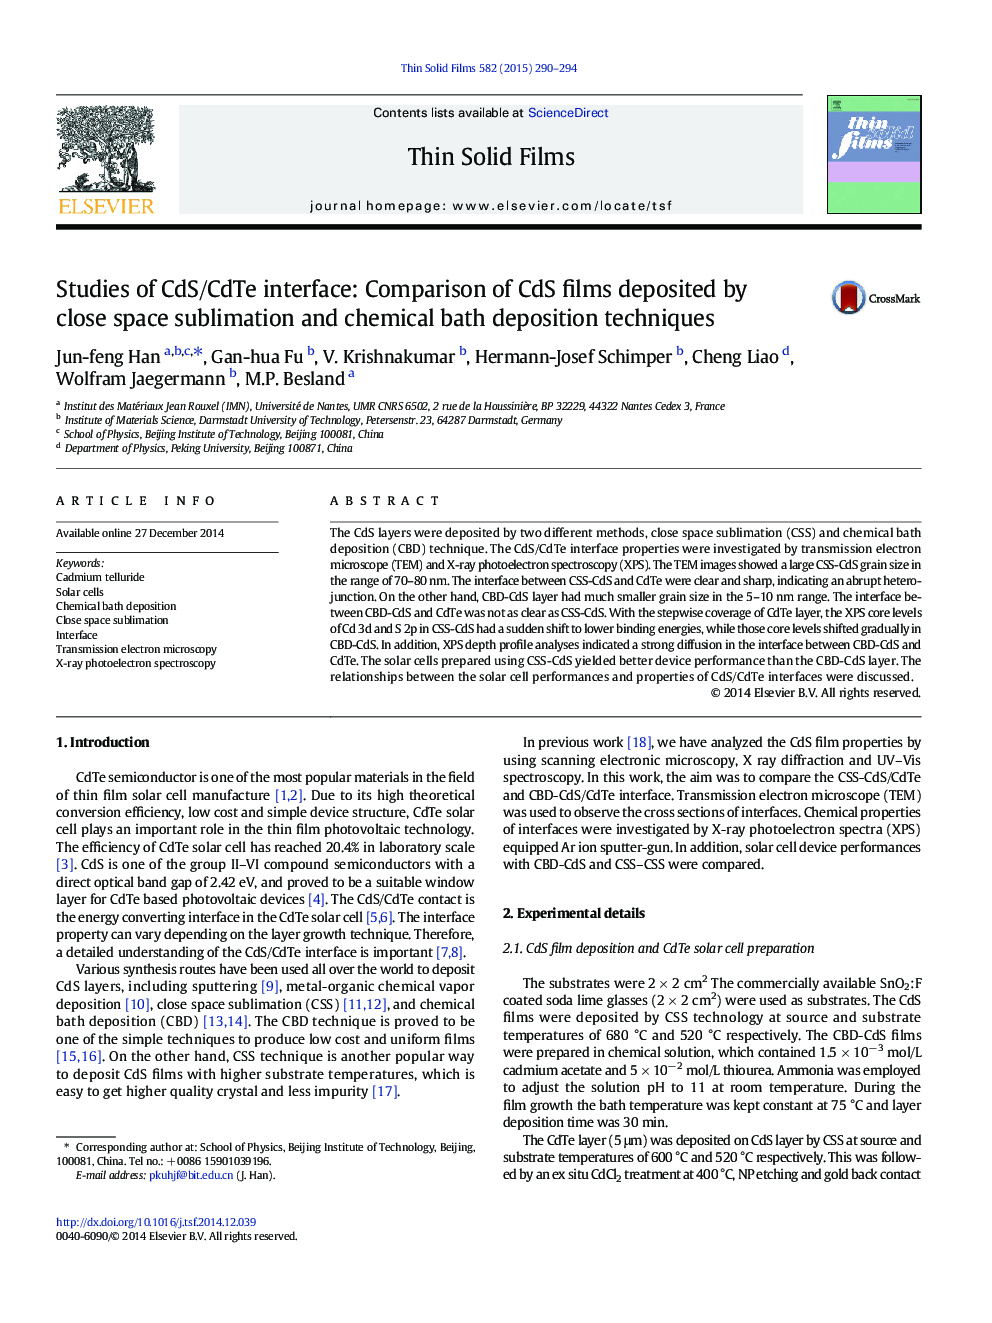 Studies of CdS/CdTe interface: Comparison of CdS films deposited by close space sublimation and chemical bath deposition techniques